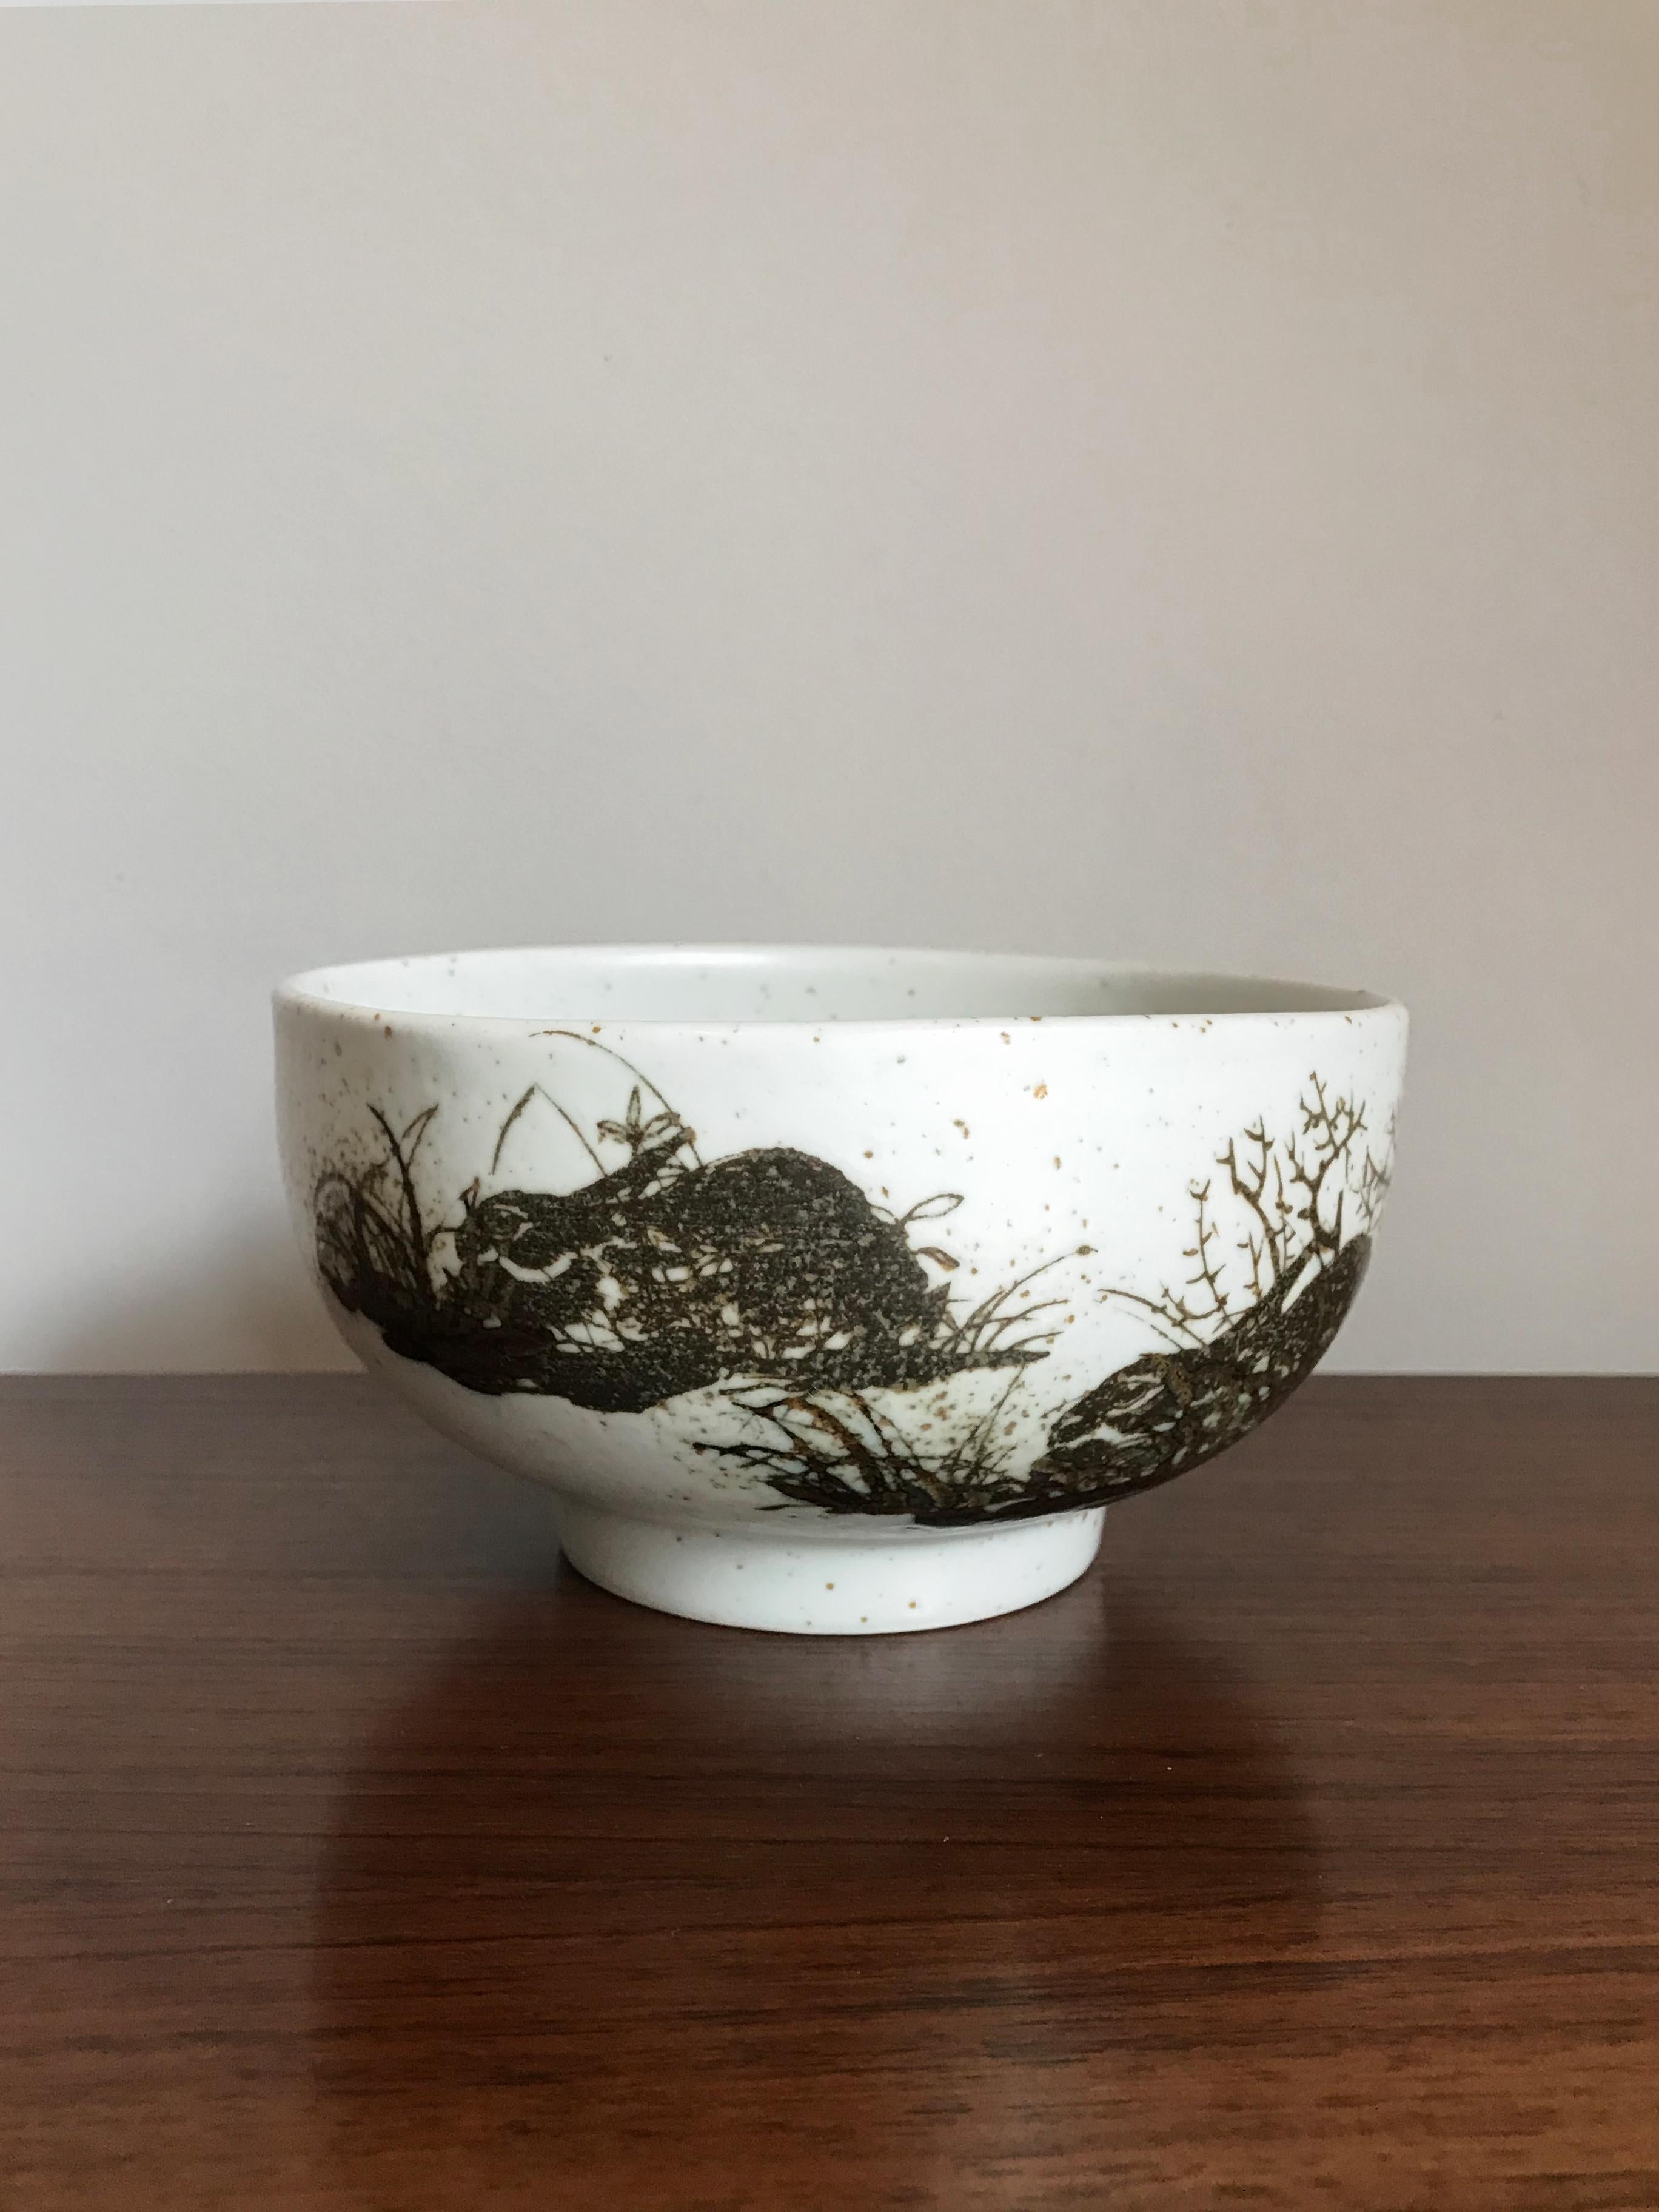 Scandinavian ceramic bowl designed by Danish artist Nils Thorsson and produced by Royal Copenhagen from 1960s
Numbering and signature of the producer under the base.
Measurements:
Height 8 cm, width 14 cm, depth 13 cm.